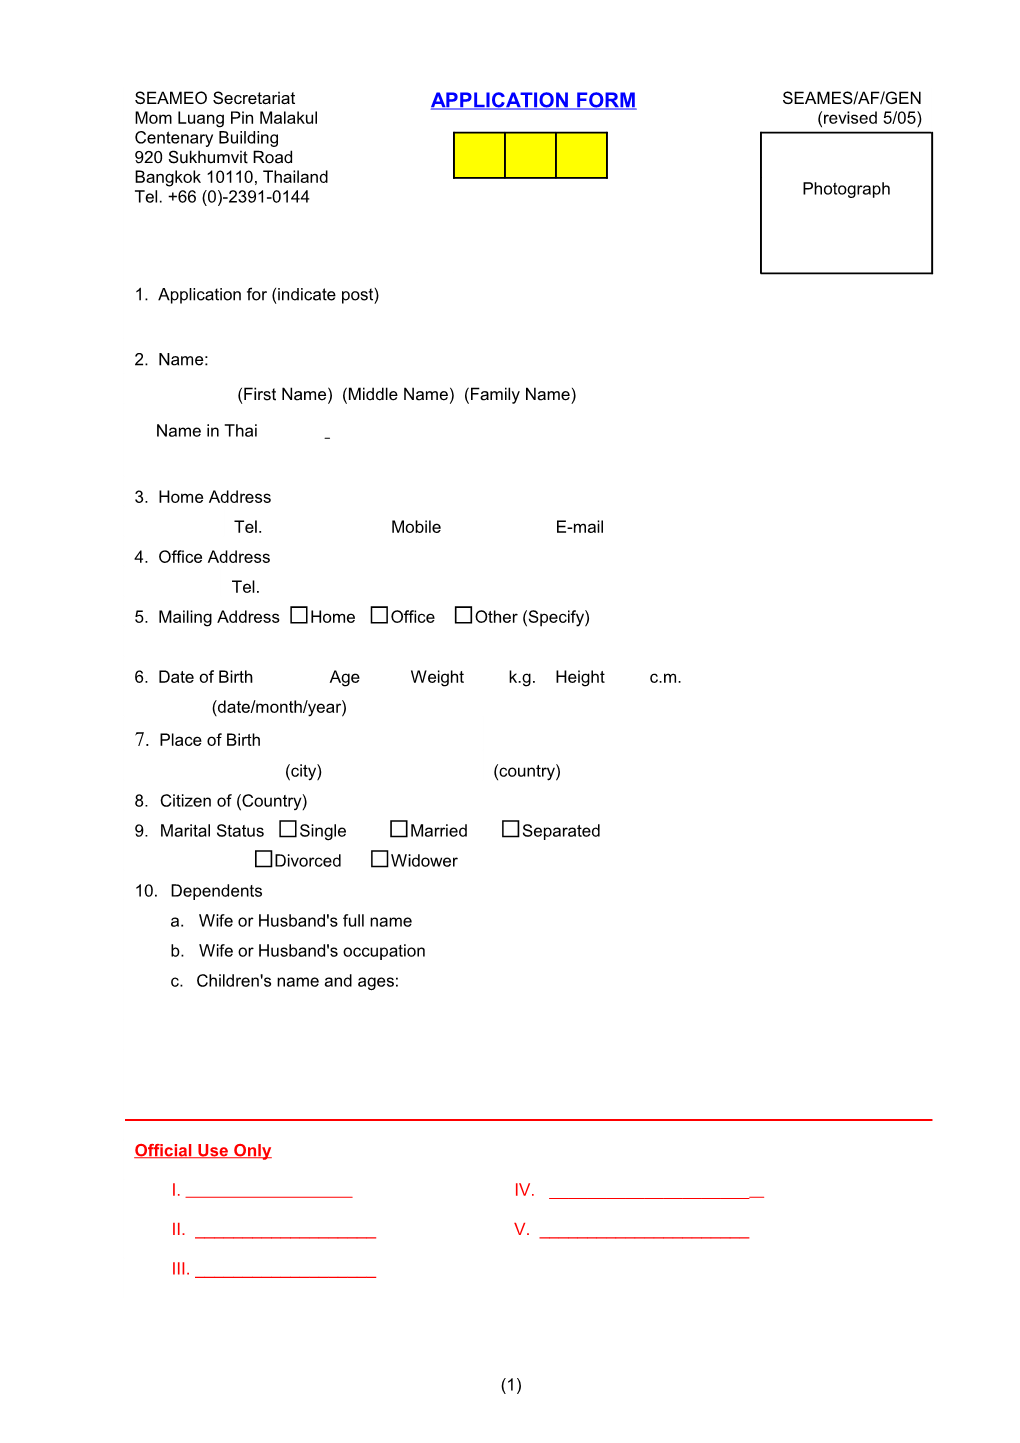 Application Form s45